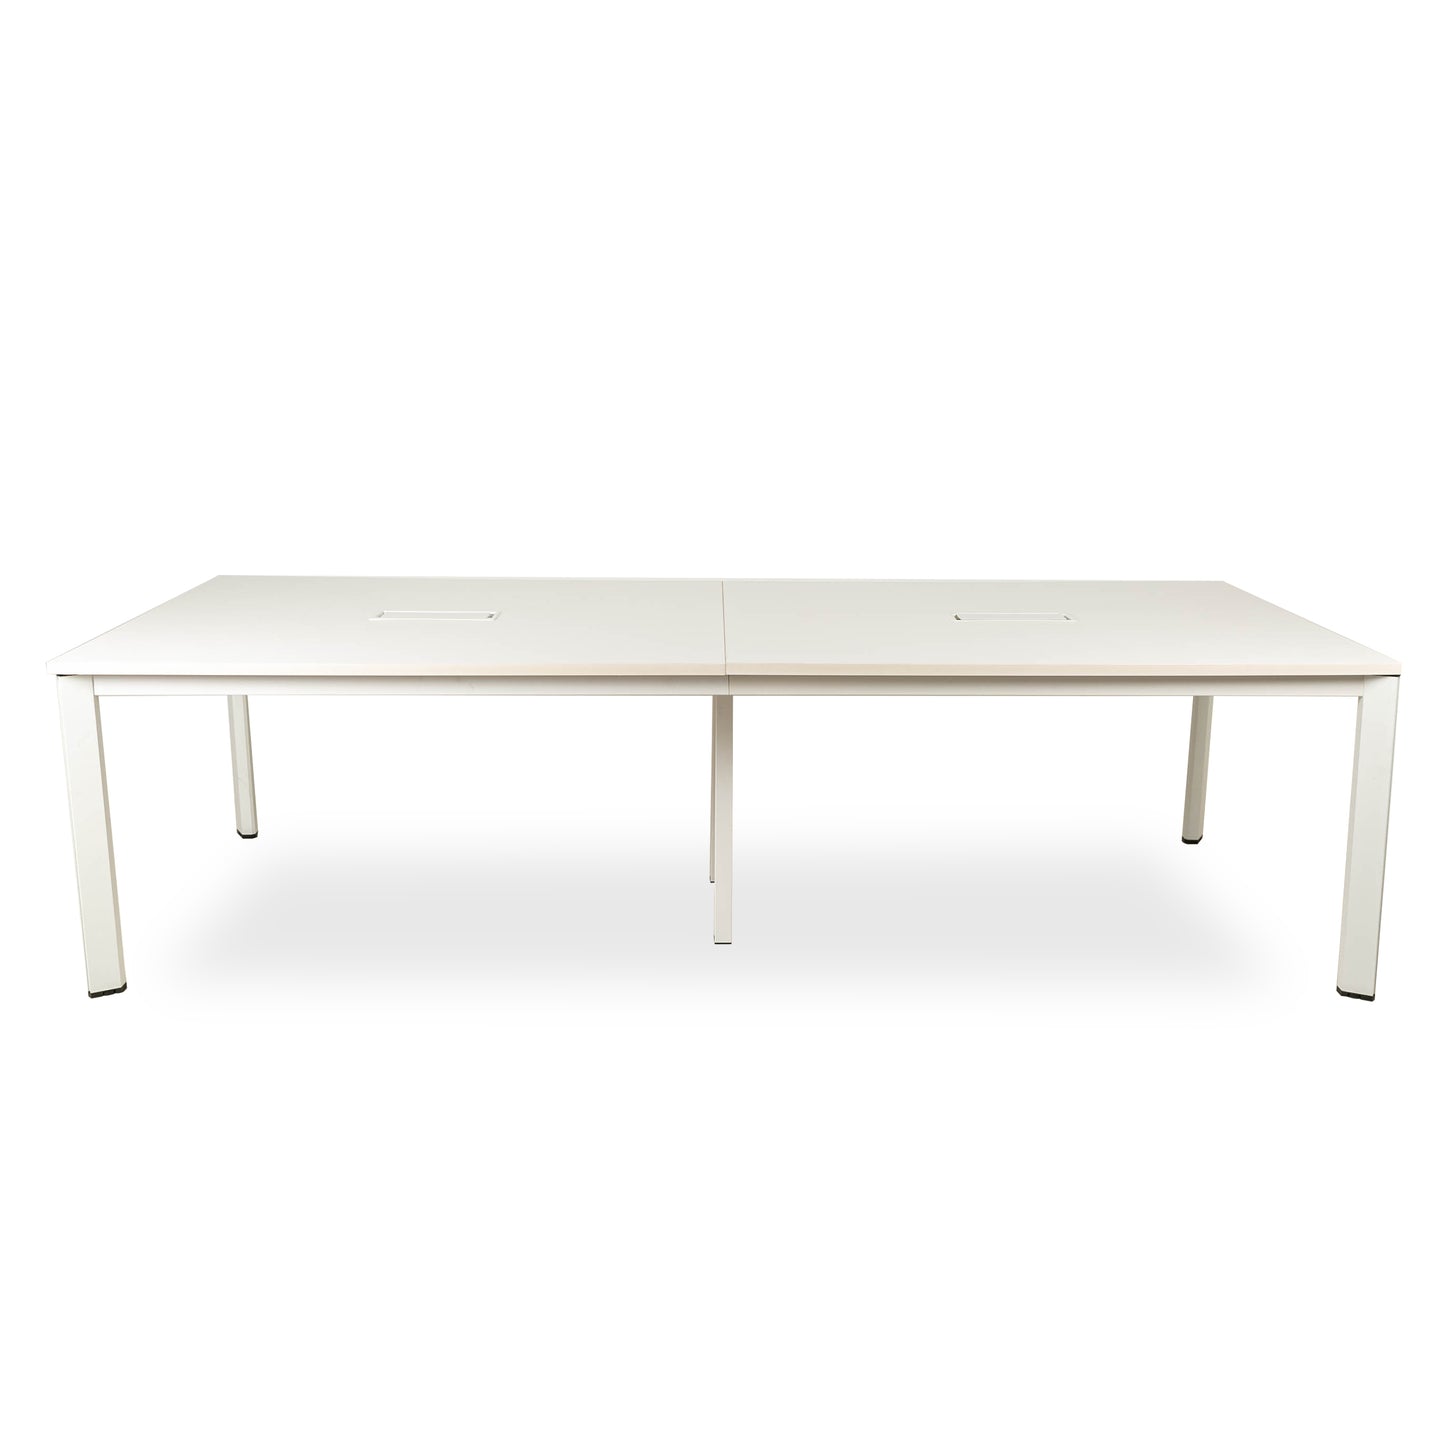 Cluster Office Table - ContractWorld Furniture